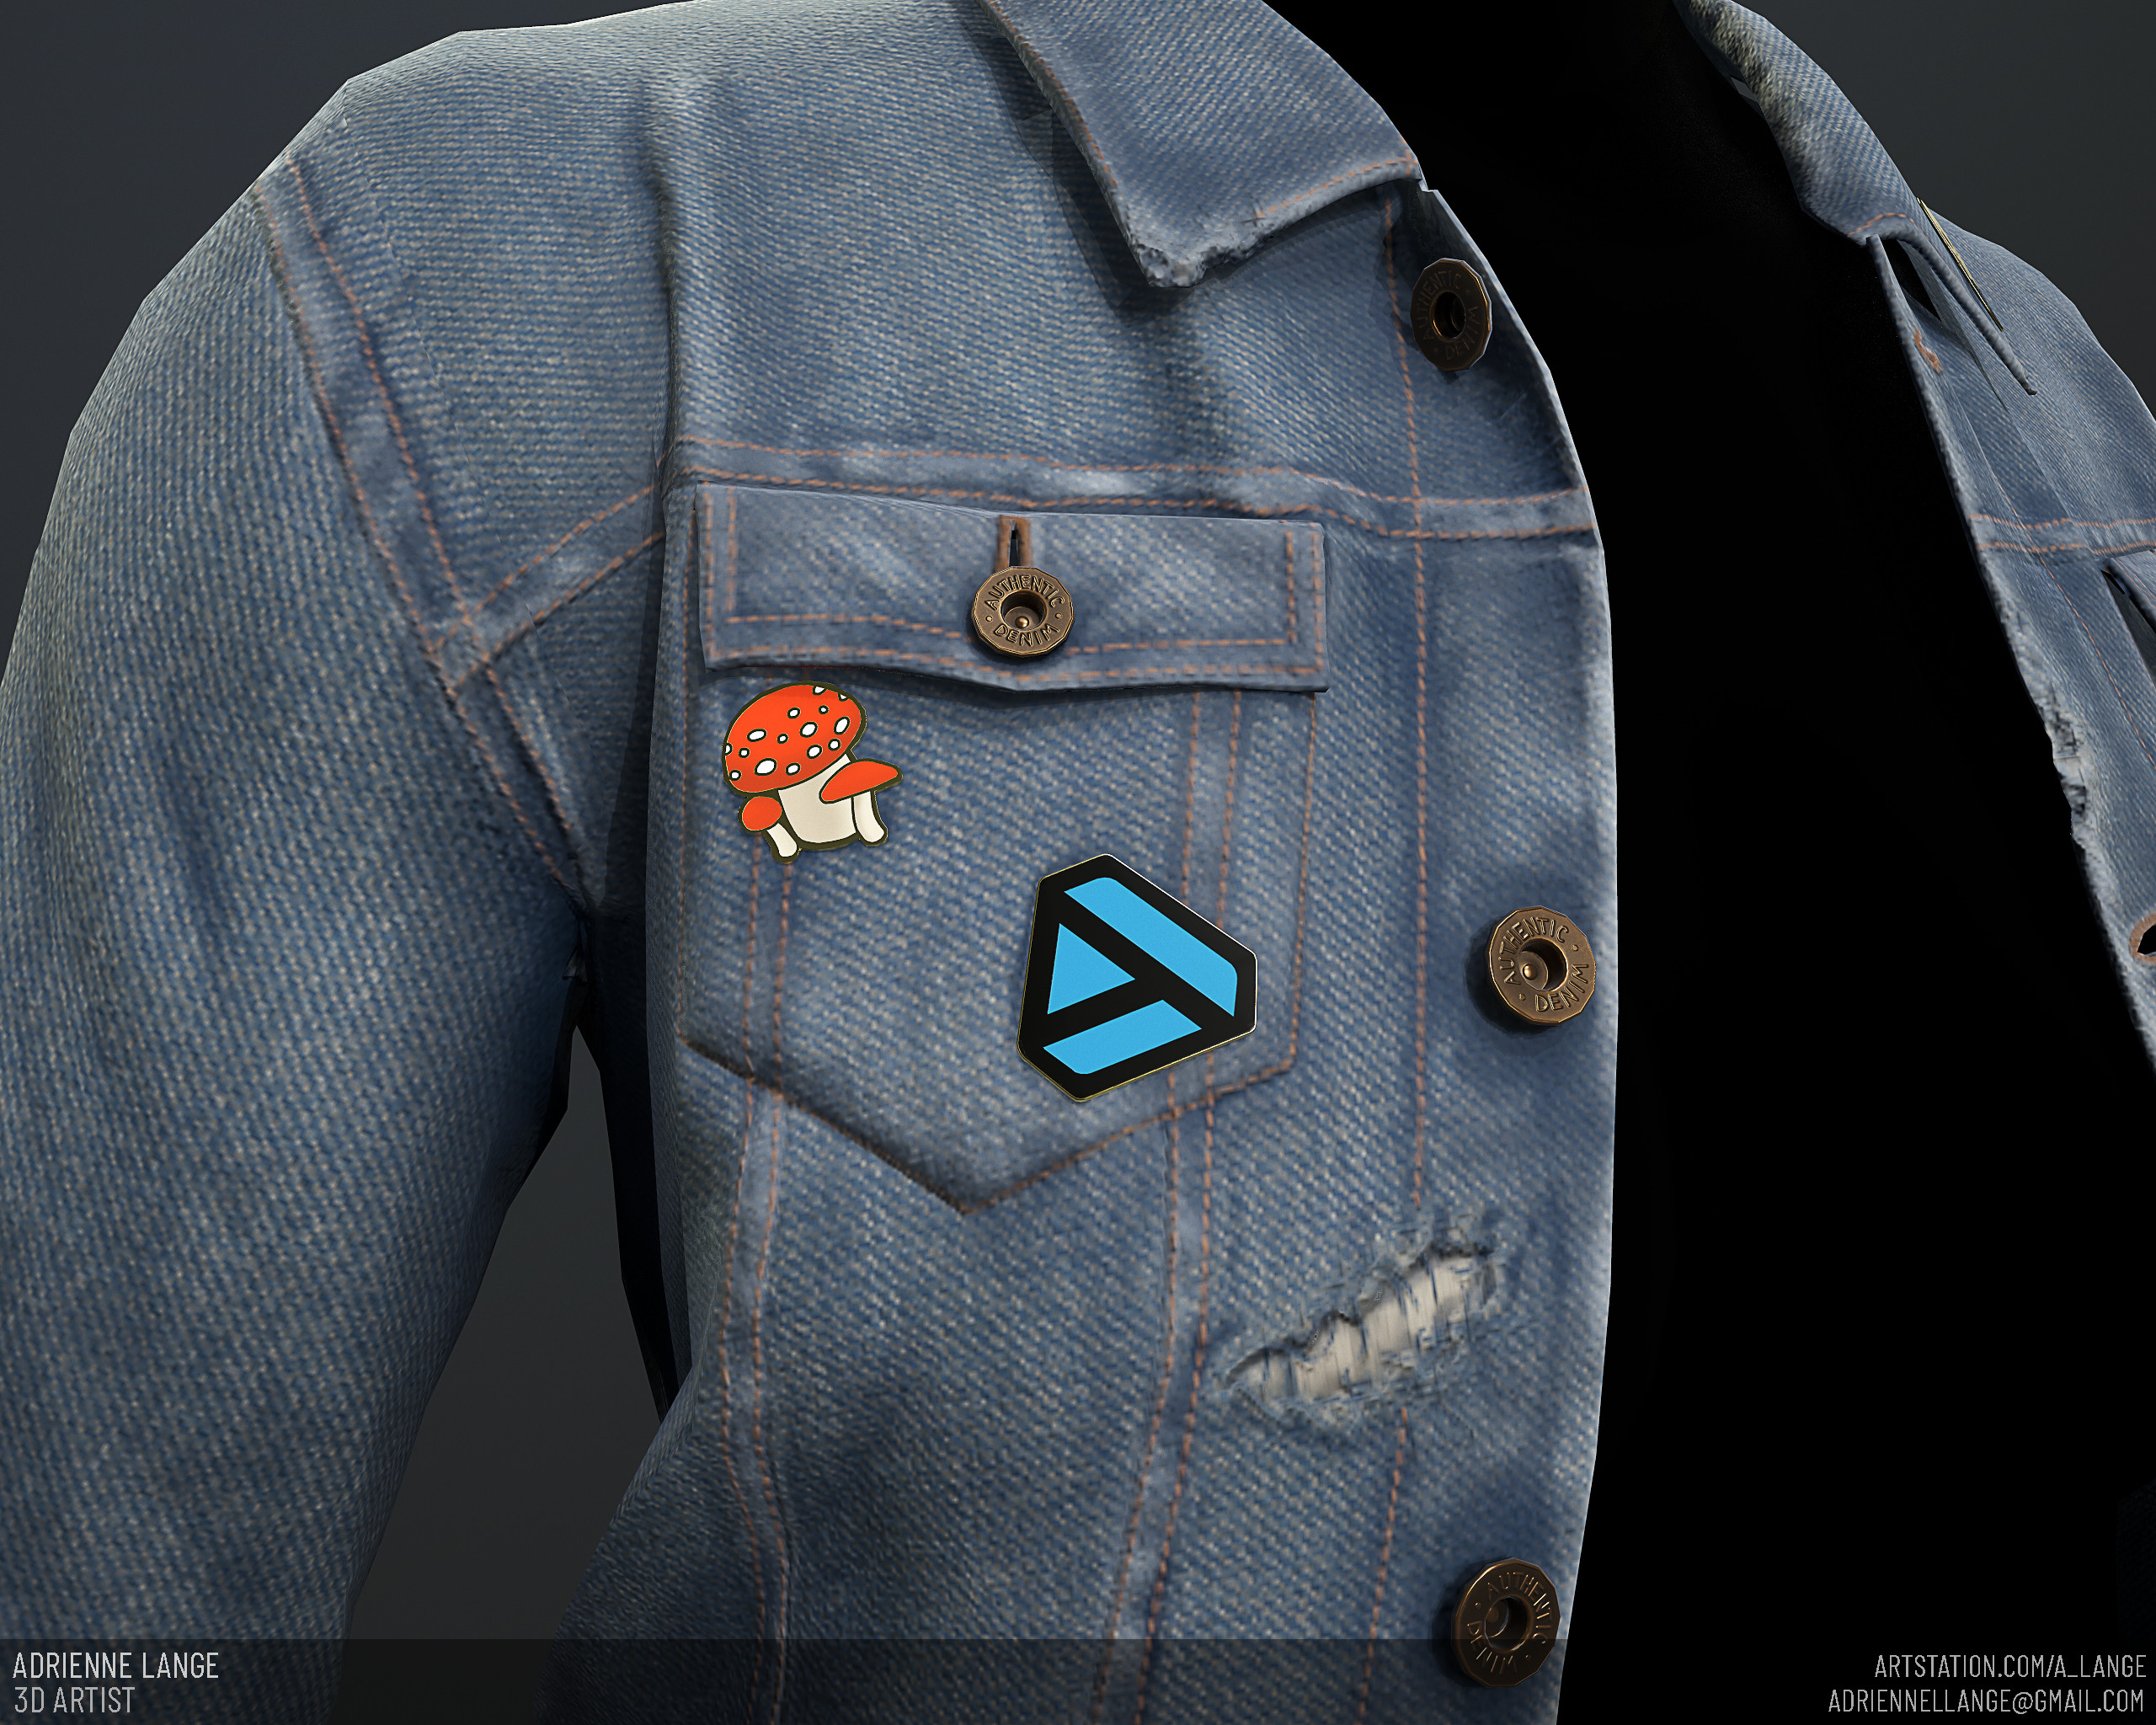 Denim Jacket With Patches - VisualHunt